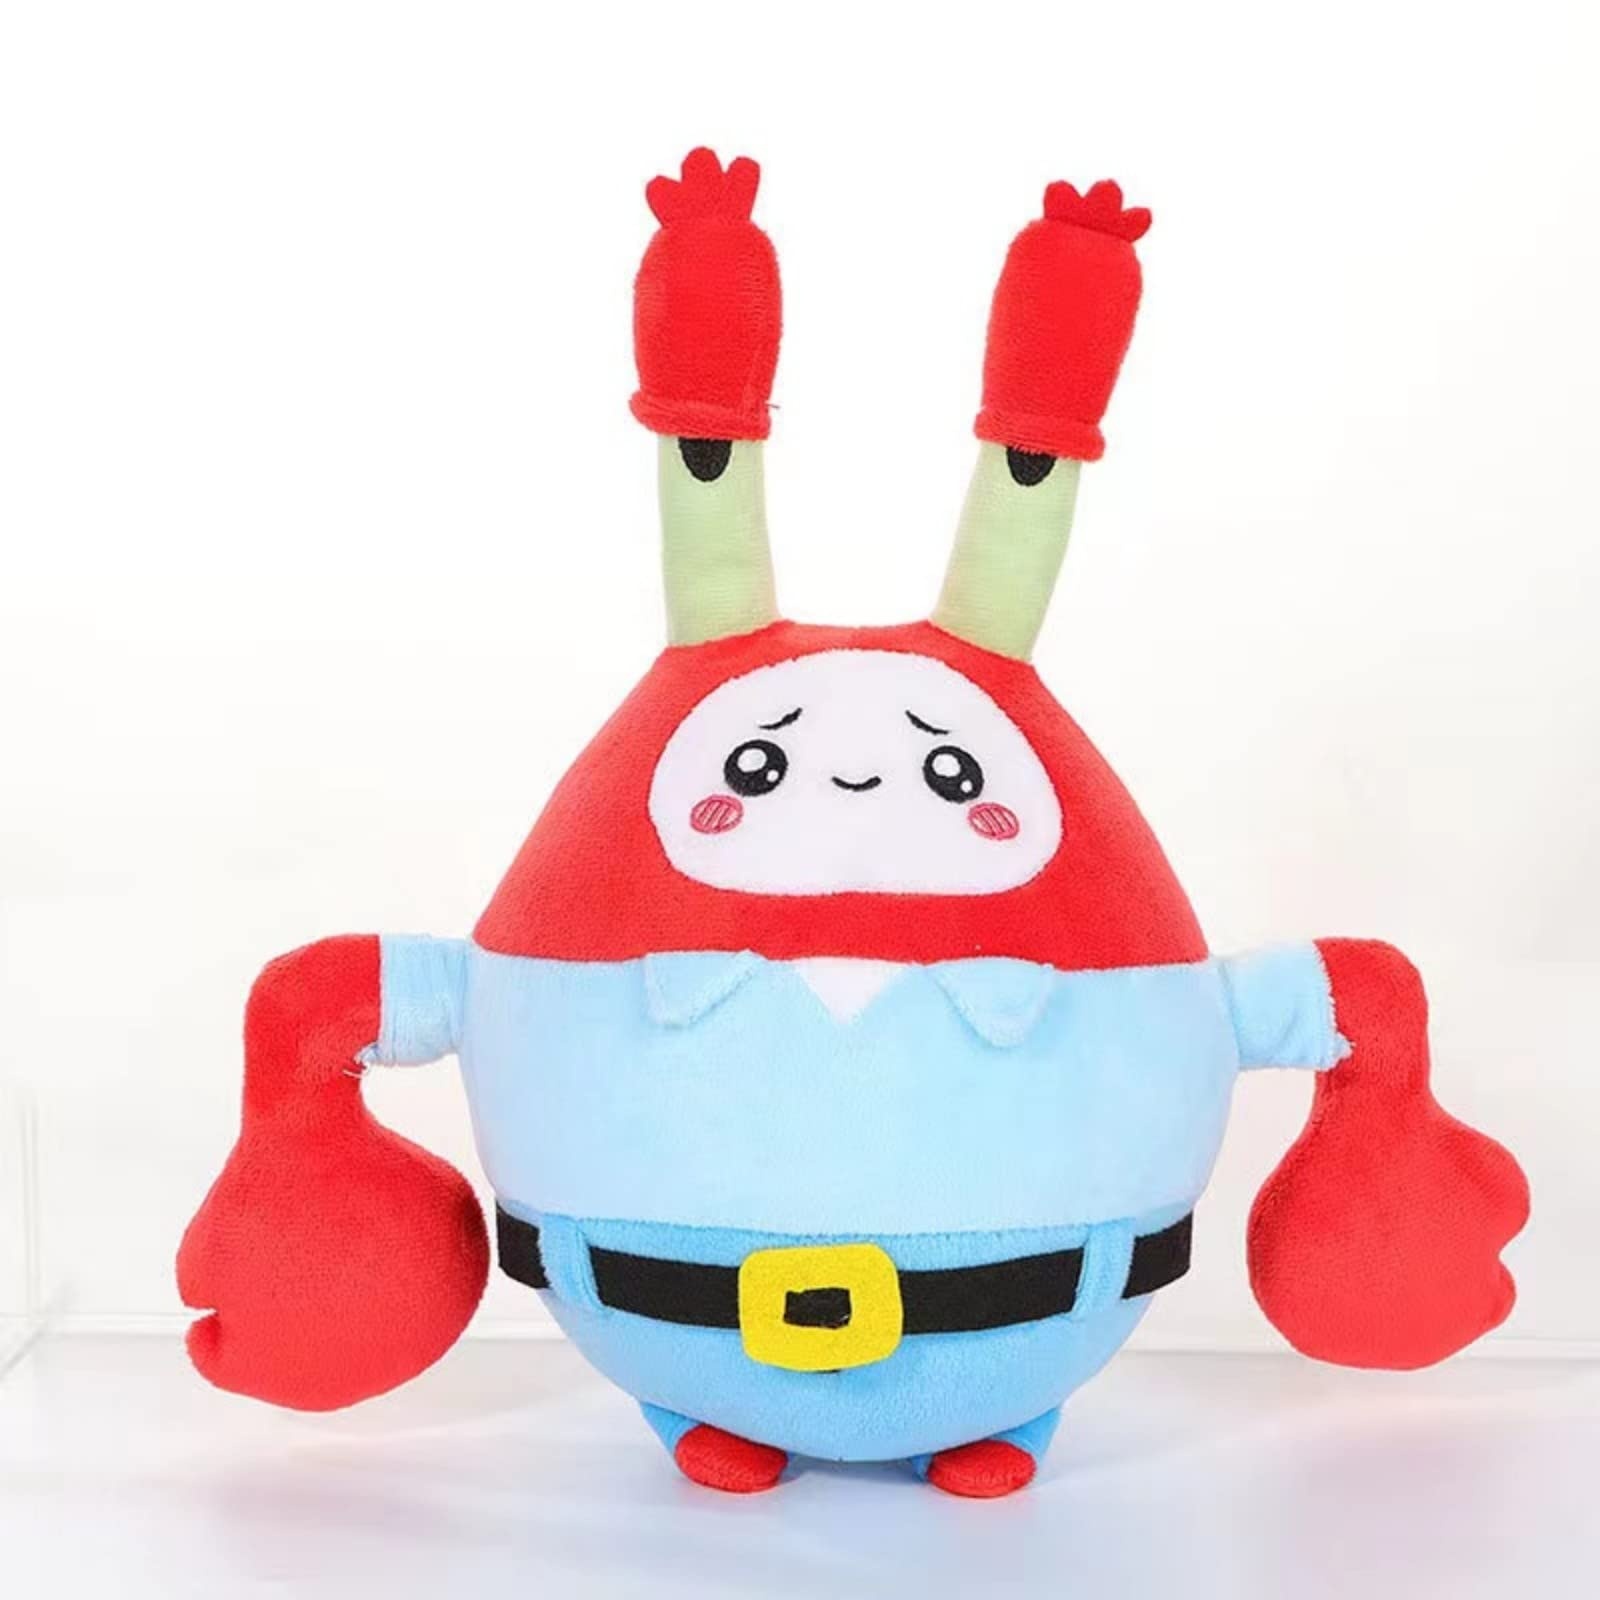 LANKYBOX Boxy Plush Toy,Lanky Toys Foxy Boxy and Rocky,Soft Stuffed Plush Toy with Removable Hood,The Best Holiday Birthday Gifts for Kids and Fans... (Crab Ghosty)